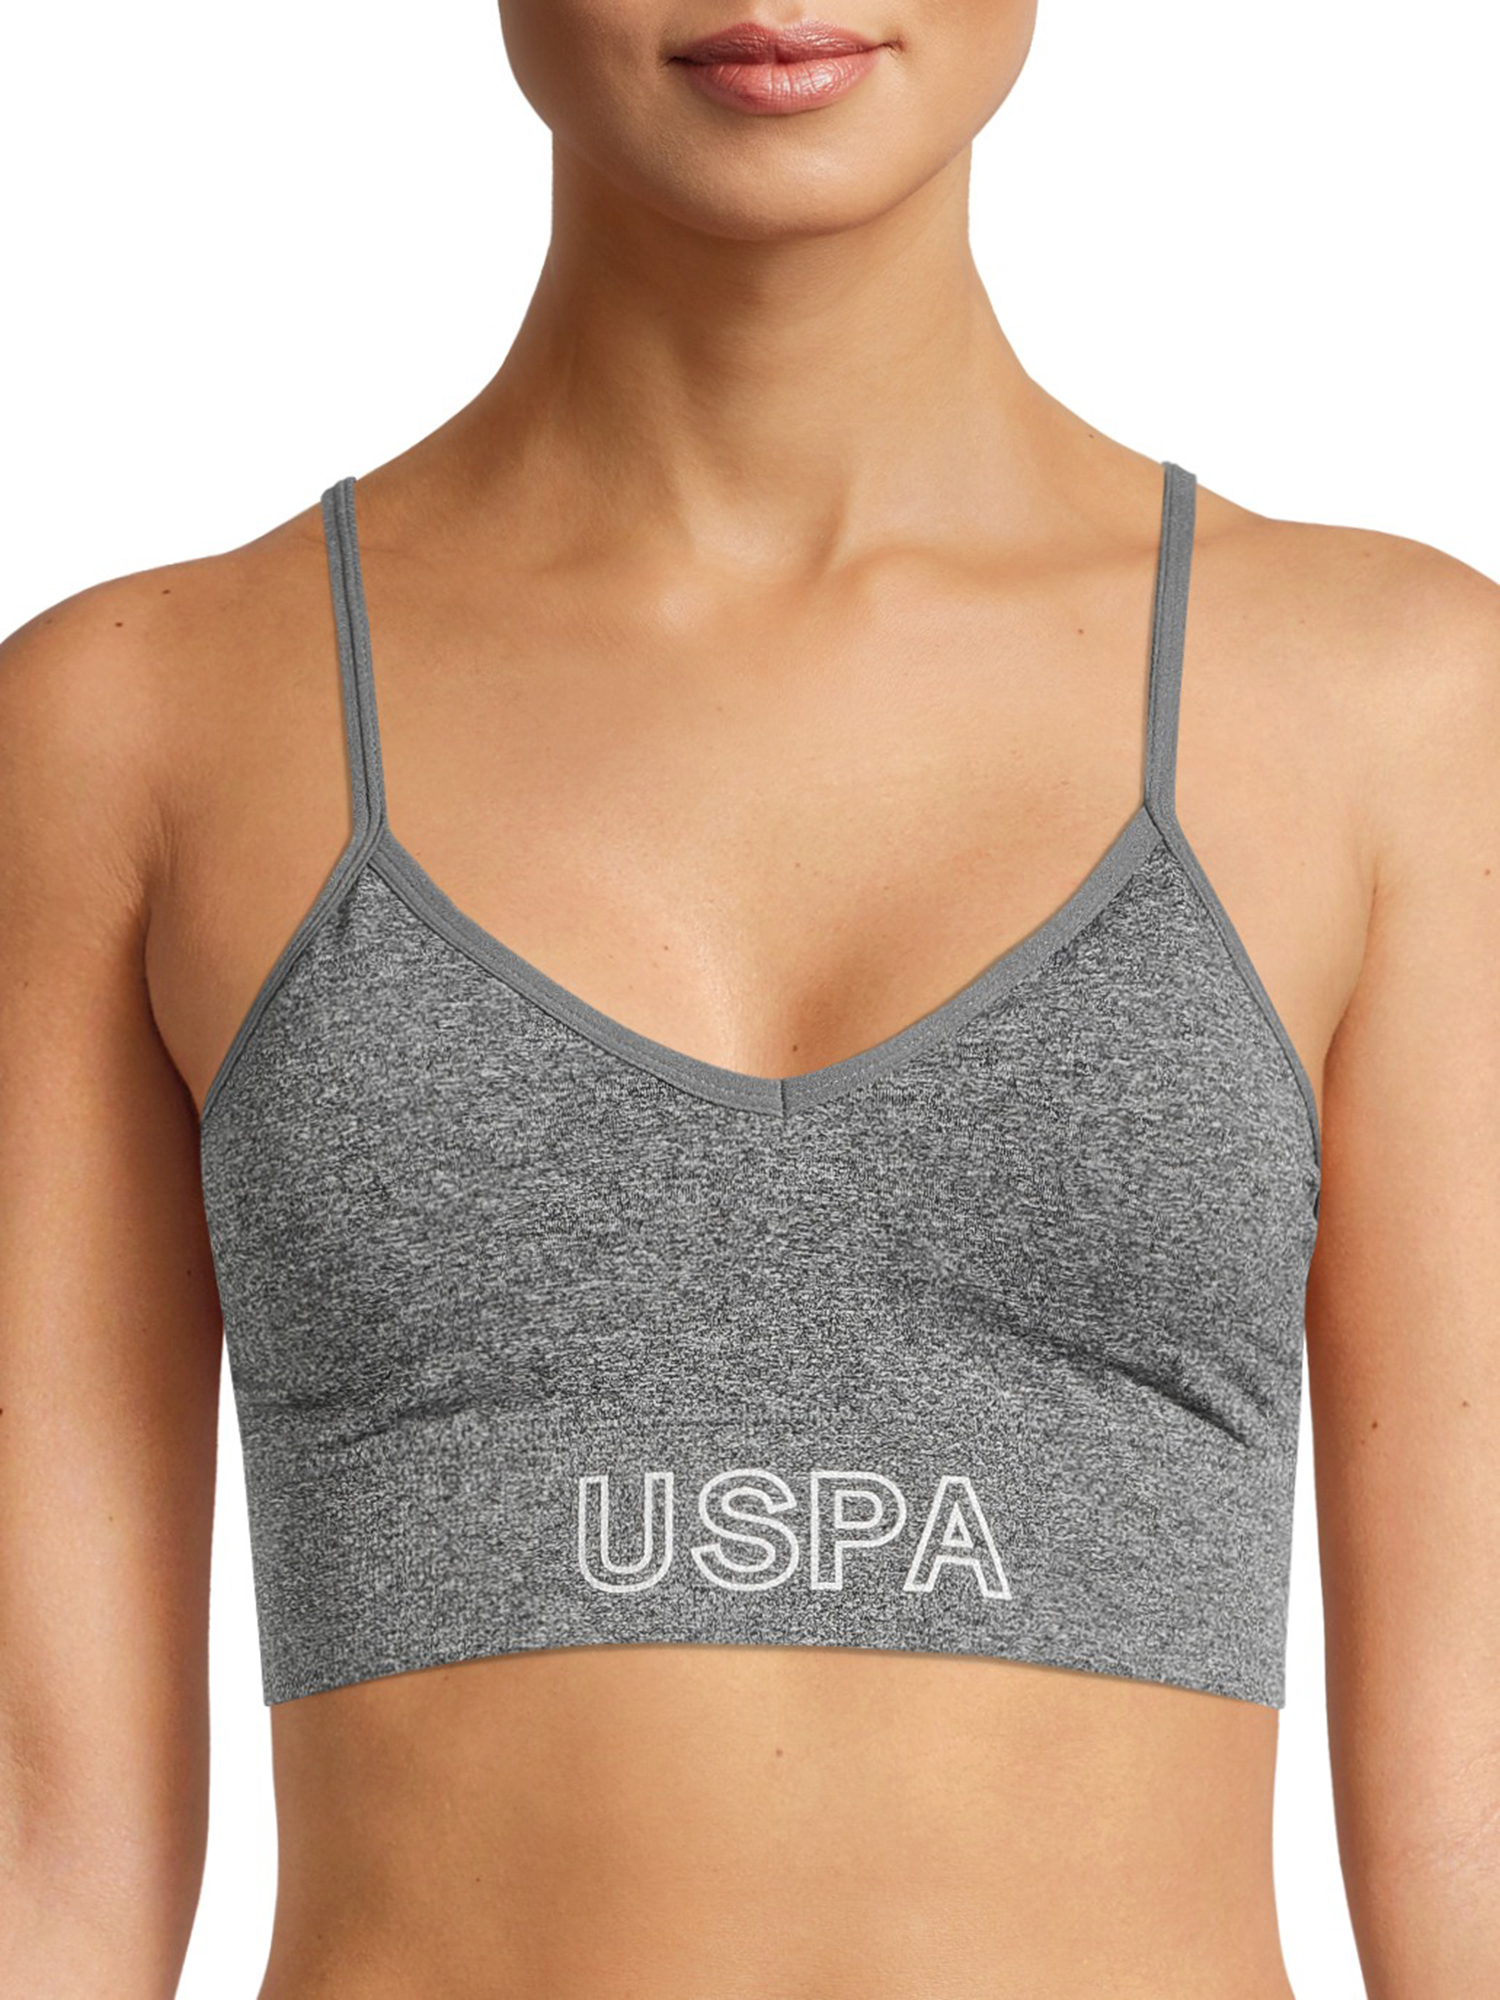 U.S. Polo Assn. Women's Tag-Free Seamless Comfort Bra Set, 3-Pack - image 2 of 3